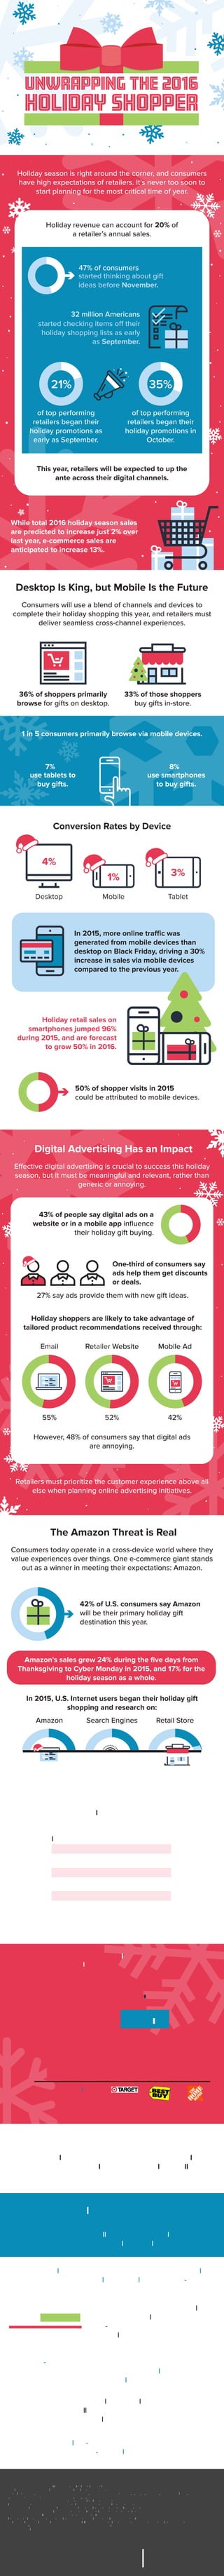 4%
3%1%
Email Retailer Website Mobile Ad
55% 52% 42%
Amazon Search Engines Retail Store
35% 23% 20%
Consumers like Amazon because:
50%
36%
29%
5%
15%
25%
35%
34%
6%
3%
2%
3%
21% 35%
Holiday season is right around the corner, and consumers
have high expectations of retailers. It’s never too soon to
start planning for the most critical time of year.
47% of consumers
Holiday revenue can account for 20% of
a retailer’s annual sales.
started thinking about gift
ideas before November.
32 million Americans
started checking items off their
holiday shopping lists as early
as September.
Desktop Is King, but Mobile Is the Future
Consumers will use a blend of channels and devices to
complete their holiday shopping this year, and retailers must
deliver seamless cross-channel experiences.
1 in 5 consumers primarily browse via mobile devices.
36% of shoppers primarily
browse for gifts on desktop.
33% of those shoppers
buy gifts in-store.
of top performing
retailers began their
holiday promotions as
early as September.
of top performing
retailers began their
holiday promotions in
October.
While total 2016 holiday season sales
are predicted to increase just 2% over
last year, e-commerce sales are
anticipated to increase 13%.
This year, retailers will be expected to up the
ante across their digital channels.
8%
use smartphones
to buy gifts.
7%
use tablets to
buy gifts.
In 2015, more online traffic was
generated from mobile devices than
desktop on Black Friday, driving a 30%
increase in sales via mobile devices
compared to the previous year.
50% of shopper visits in 2015
could be attributed to mobile devices.
43% of people say digital ads on a
website or in a mobile app inﬂuence
their holiday gift buying.
27% say ads provide them with new gift ideas.
Holiday shoppers are likely to take advantage of
tailored product recommendations received through:
One-third of consumers say
ads help them get discounts
or deals.
Holiday retail sales on
smartphones jumped 96%
during 2015, and are forecast
to grow 50% in 2016.
Conversion Rates by Device
Desktop Mobile Tablet
Digital Advertising Has an Impact
Effective digital advertising is crucial to success this holiday
season, but it must be meaningful and relevant, rather than
generic or annoying.
The Amazon Threat is Real
Consumers today operate in a cross-device world where they
value experiences over things. One e-commerce giant stands
out as a winner in meeting their expectations: Amazon.
Retailers must prioritize the customer experience above all
else when planning online advertising initiatives.
42% of U.S. consumers say Amazon
will be their primary holiday gift
destination this year.
In 2015, U.S. Internet users began their holiday gift
shopping and research on:
Amazon’s sales grew 24% during the ﬁve days from
Thanksgiving to Cyber Monday in 2015, and 17% for the
holiday season as a whole.
It’s easy to use.
They are Prime members.
Product reviews.
Top 5 U.S. Retail Websites
Ranked by Holiday Shopper Visit Share in 2015
How Retailers Can Win This Year
Brands that take a hint from Amazon and give shoppers the
experiences they crave will proﬁt most this holiday season.
This means retailers should:
However, 40% of consumers say Amazon is not their ﬁrst
choice for holiday shopping, which means there is plenty
of opportunity for retailers to capture holiday dollars.
However, 48% of consumers say that digital ads
are annoying.
Offer frictionless, consistent experiences across channels
with added conveniences like buy online/pick up in-store,
free shipping and easy returns.
Use ﬁrst-party data to better understand and recognize
their customers across devices and offer relevant
assistance and promotions in real time.
Create memorable in-store shopping experiences that
meet the needs of cross-channel consumers.
60% of consumers agree the ability to
purchase items online and pick them
up in-store inﬂuences where they
make holiday gift purchases.
46% of consumers say relevant deals
and discounts will motivate them to
buy this holiday season.
Sources:
NRF: https://nrf.com/resources/retail-library/2015-retail-holiday-planning-playbook
Retailing Today: http://www.retailingtoday.com/article/holiday-shopping-start-
ing-earlier-ever?utm_source=Main+List+%28imPULSE%29&utm_campaign=d5712f69da-imPULSE_7_307_30_2014&utm_medium=email&utm_term=0
_ae0f6fe0b8-d5712f69da-228052957&ct=t(imPULSE_7147_14_2014)&mc
Credit Cards: http://www.creditcards.com/credit-card-news/early-holiday-shopping-survey.php
IBM: https://www-01.ibm.com/software/marketing-solutions/benchmark-reports/black-friday-report-2015.pdf
Adobe: https://blogs.adobe.com/digitalmarketing/mobile/the-mobile-trend-that-some-retail-brands-may-miss/
Shopify: https://www.shopify.com/blog/12731545-which-social-media-platforms-drive-the-most-sales-infographic
BD Report: https://www.bulldogreporter.com/what-do-consumers-real-
ly-want-this-holiday-shopping-season-mobile-convenience-personalization-social-endorsements-top-list/
MultiChannel: http://multichannelmerchant.com/opsandfulfillment/heightened-holiday-shopping-expectations-driving-retailer-preparations-31082015/
eMarketer: Retail Systems Research (RSR), Pricing 2016: Life Becomes Unmanageable
eMarketer: US Holiday Shopping Preview 2016: Absorbing the Lessons of 2015
UNWRAPPING THE 2016
HOLIDAY SHOPPER
 